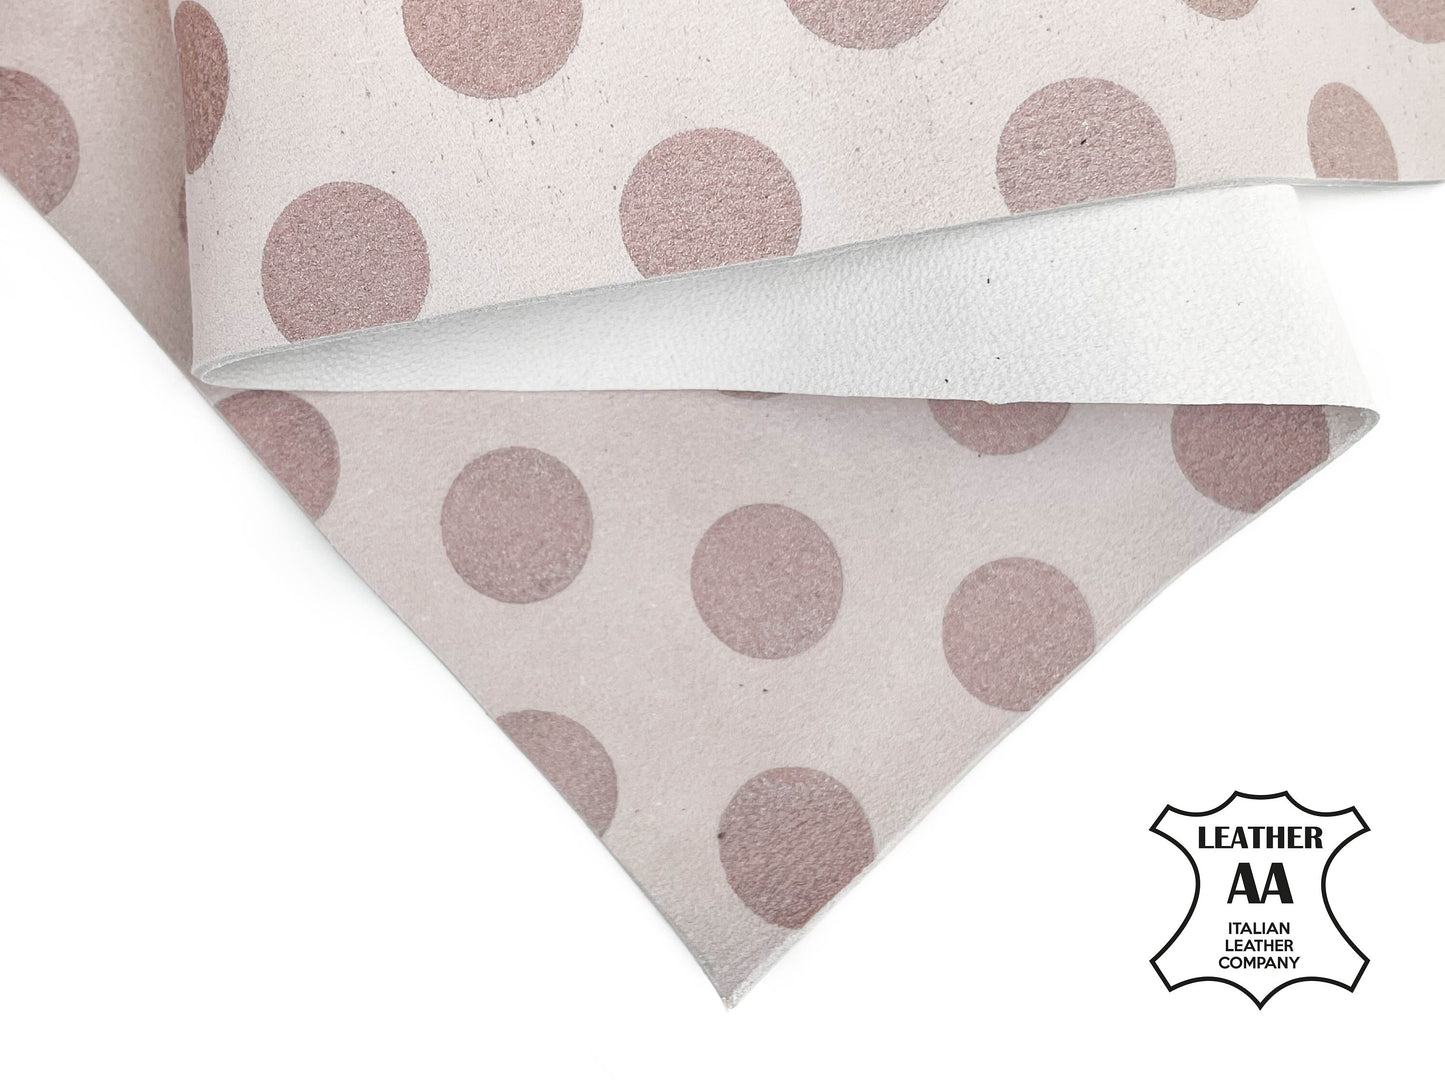 Suede Lambskin Sheets With Pink Dots 1.0mm/2.5oz / DUSTY PINK DOTS 1090